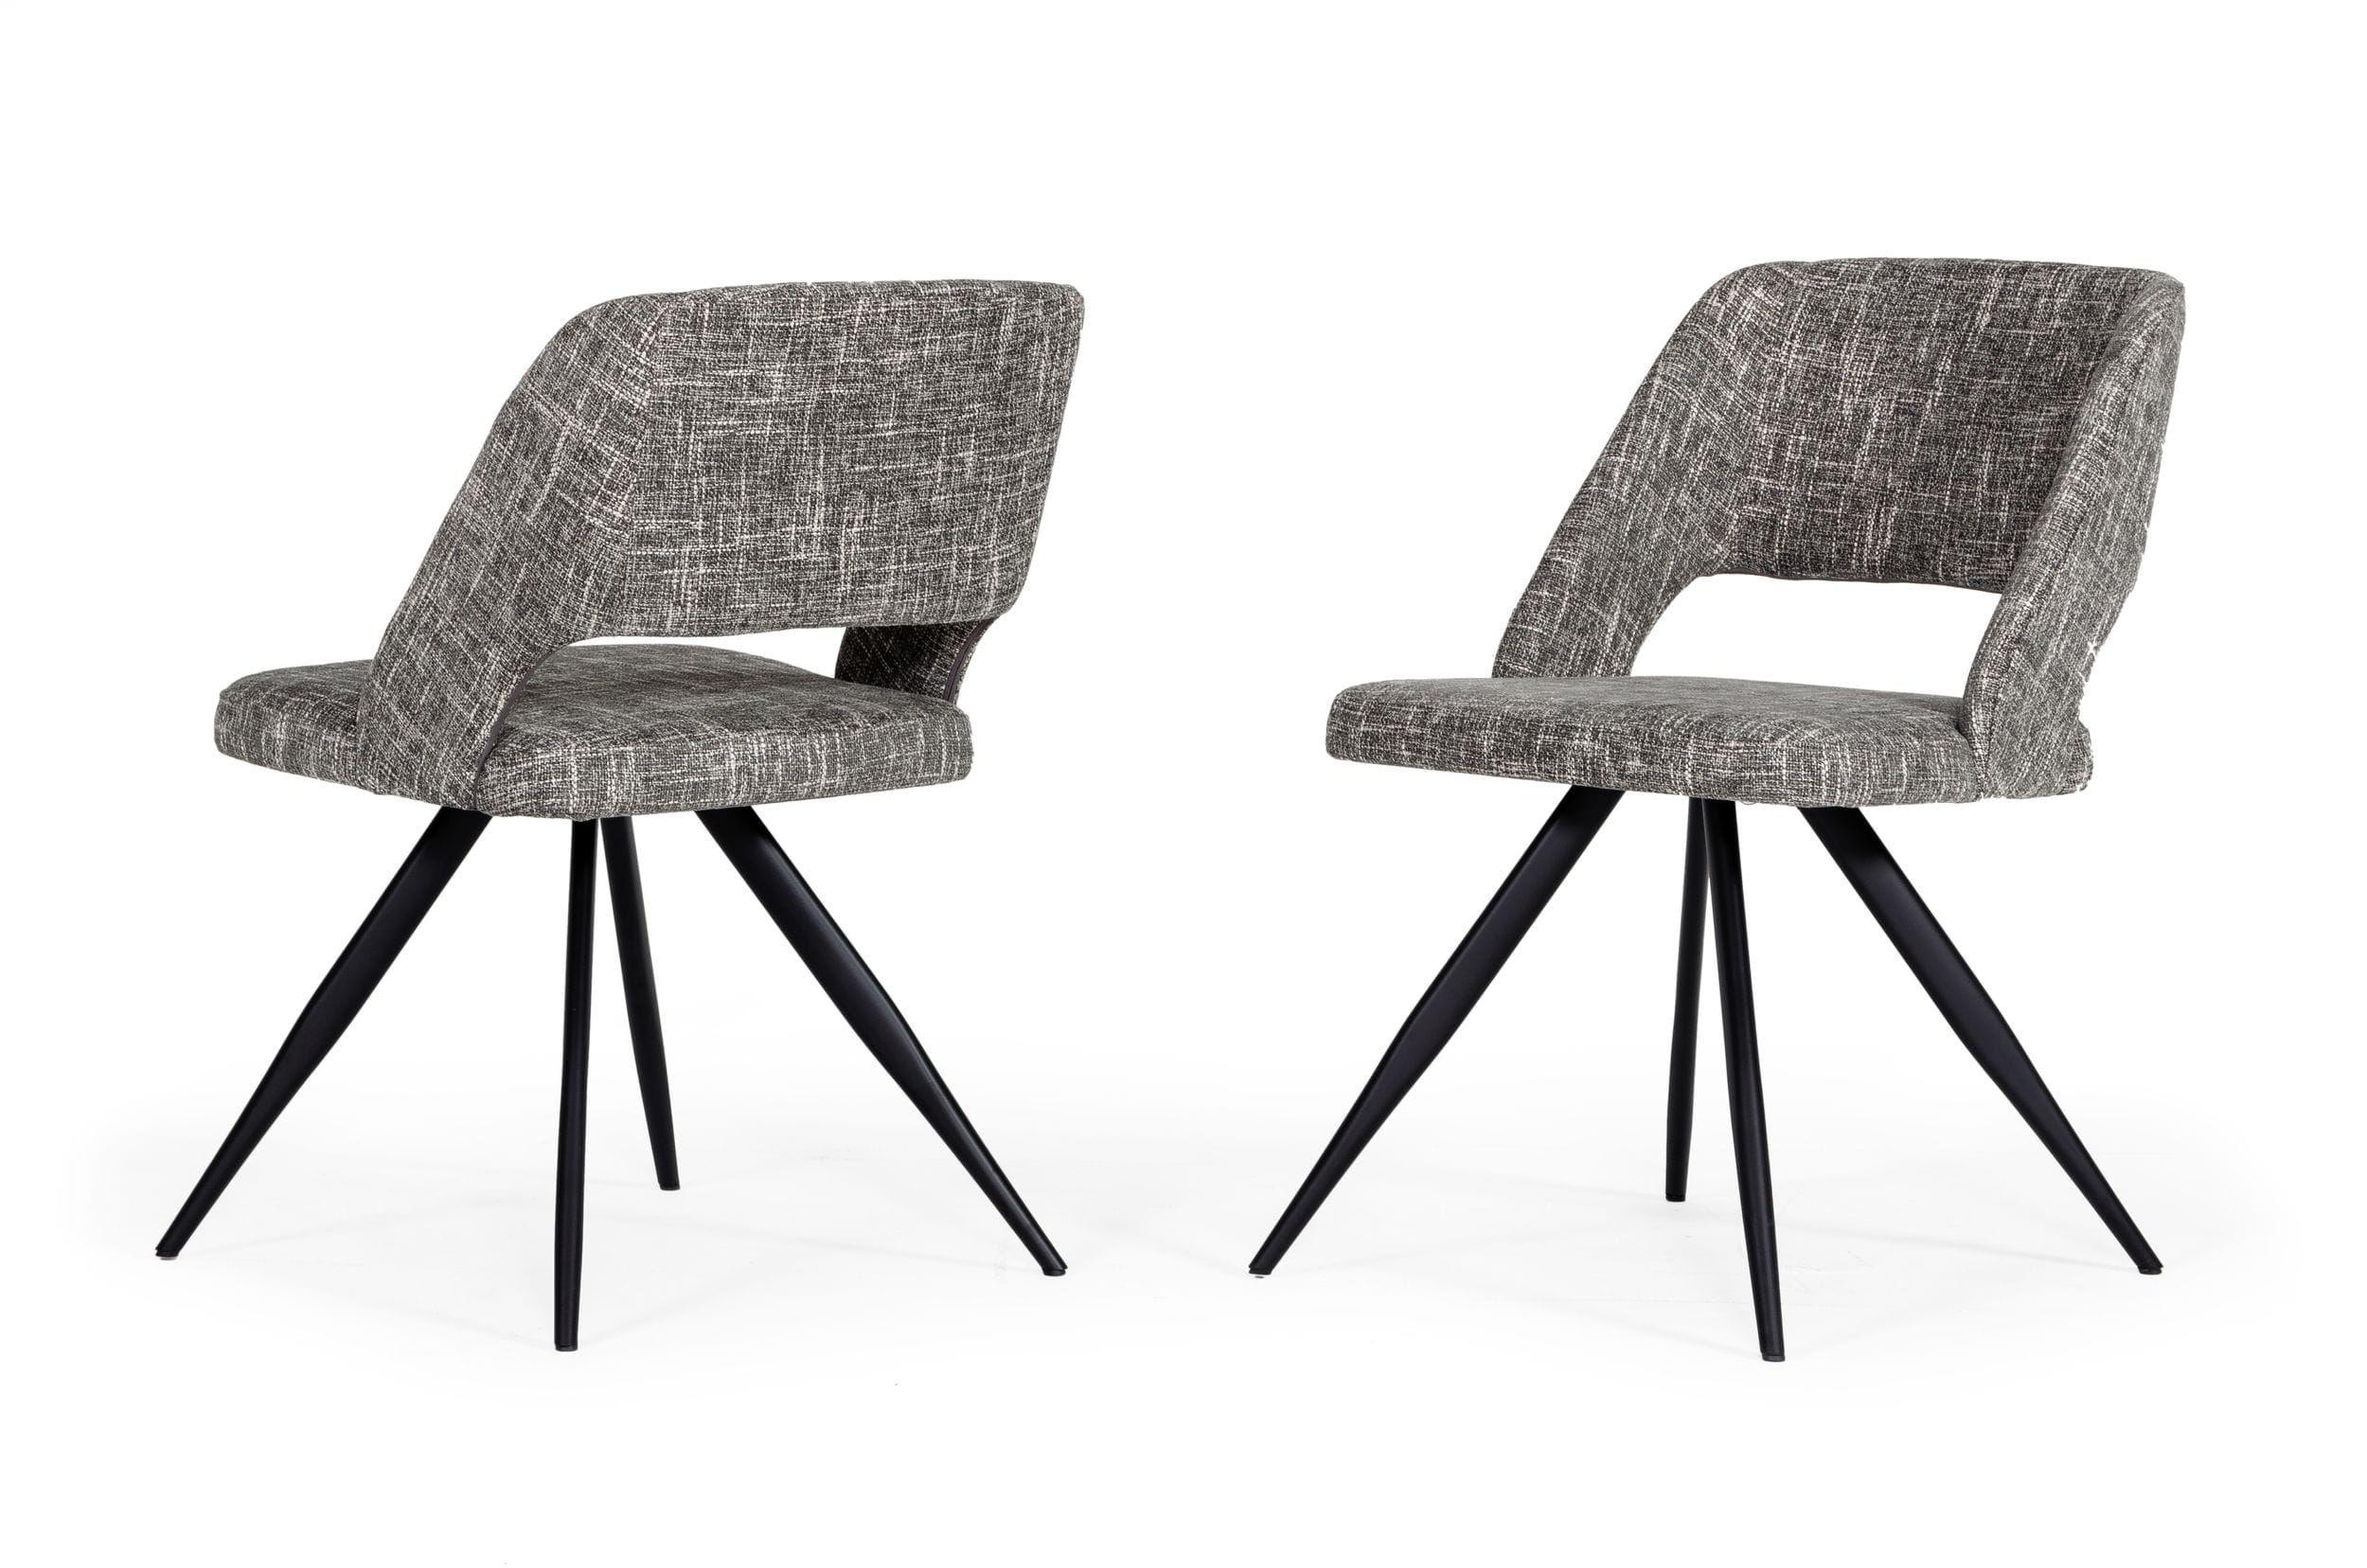 Contemporary, Modern Dining Chair Set Palmer VGEWF3207AC-GRY-2pcs in White, Black Fabric